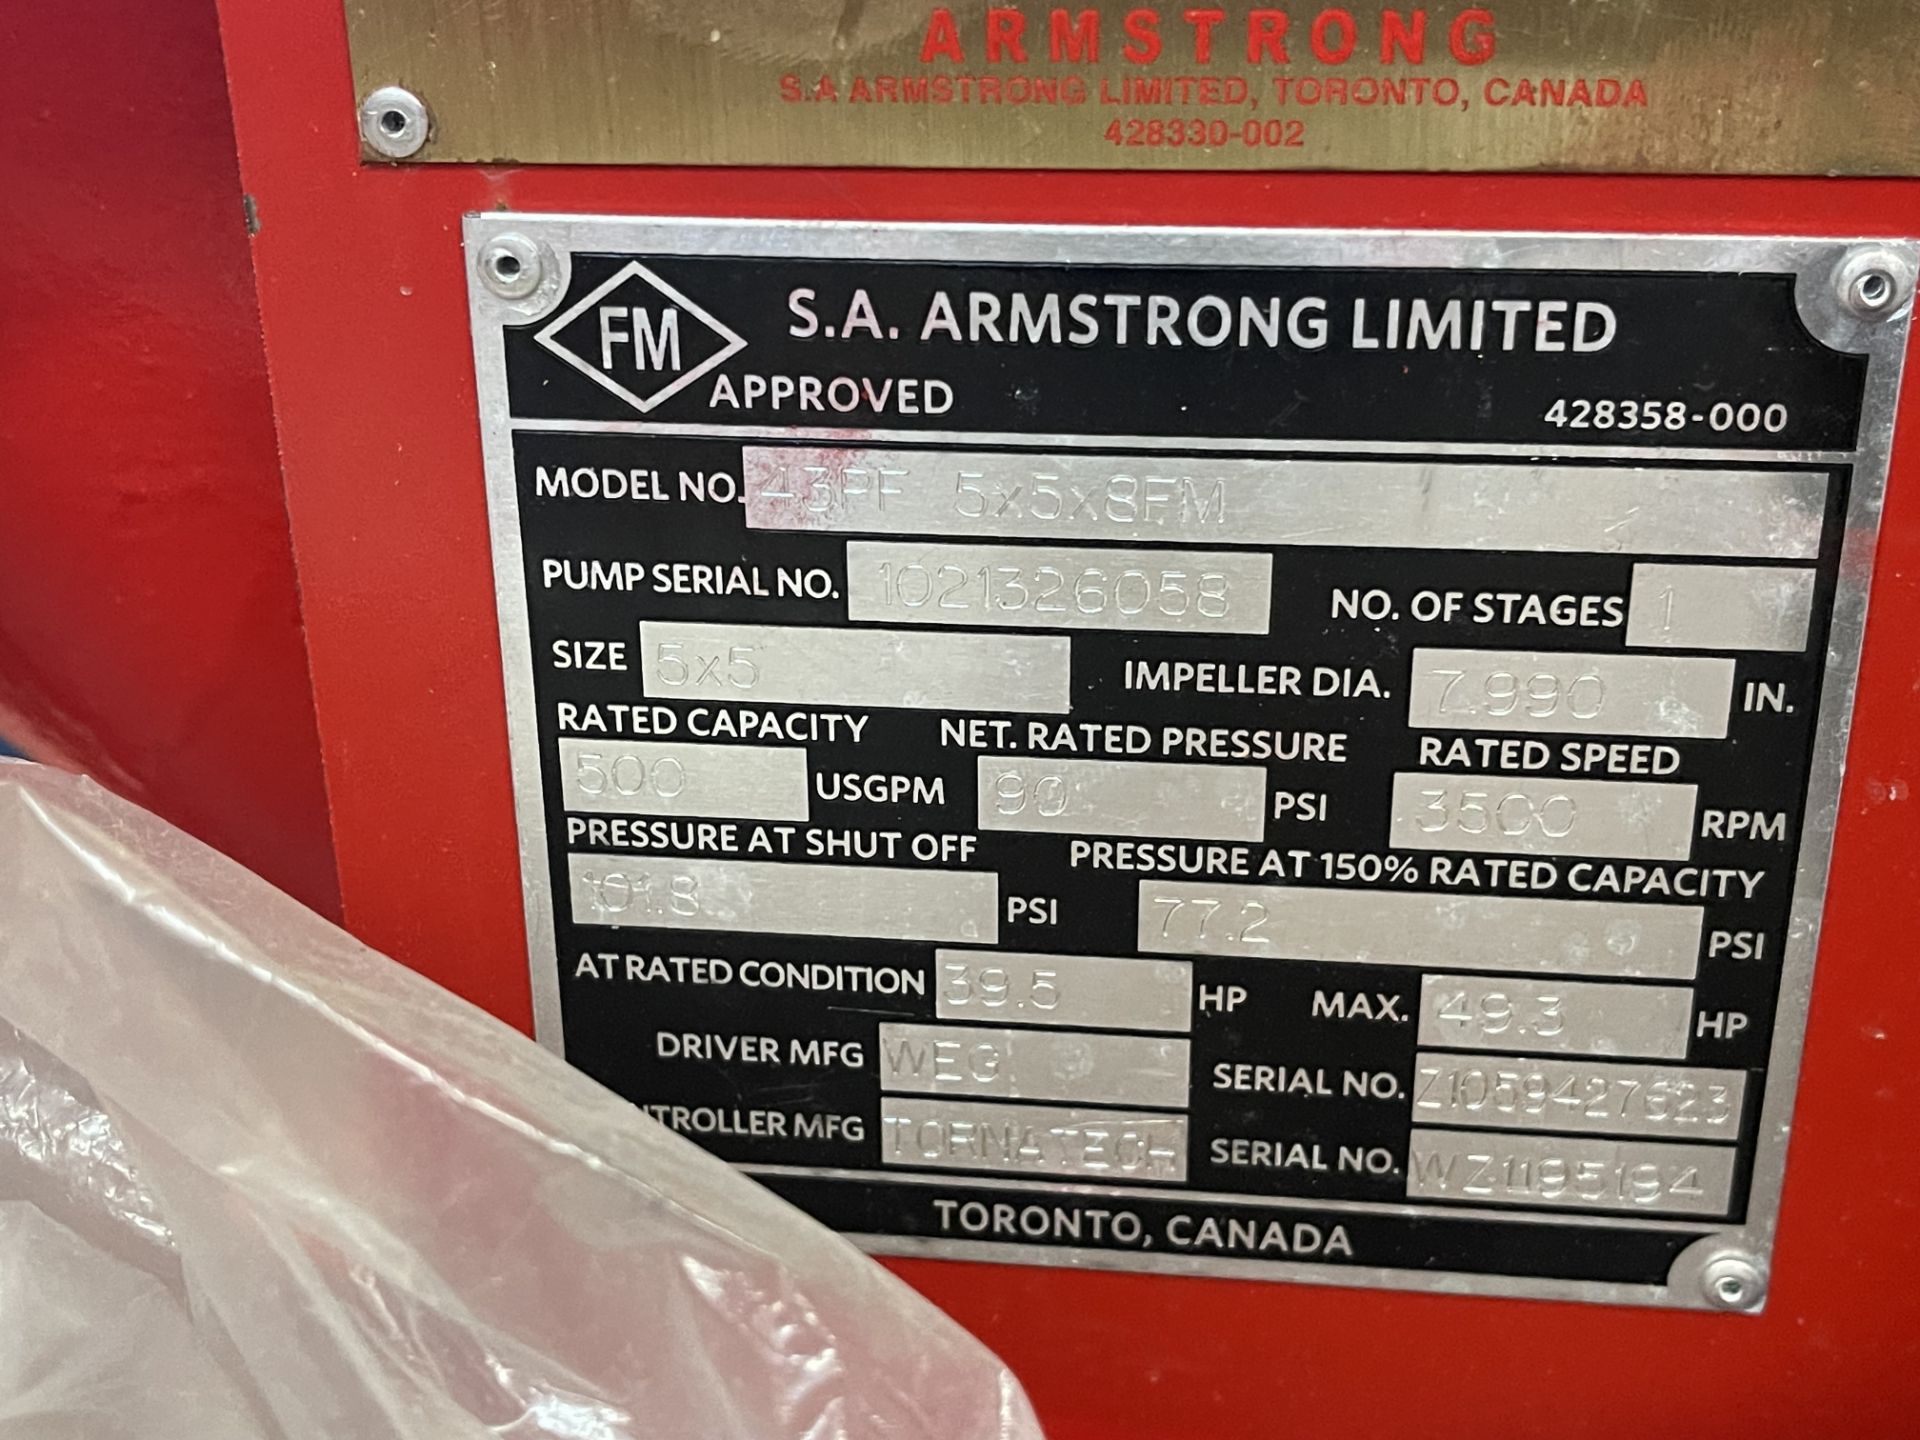 NEW (2021) ARMSTRONG VERTICAL IN-LINE FIRE PUMP, MODEL 43PF, 5 X 5 X 8FM, 181 MAX PSI W/50HP - Image 10 of 12